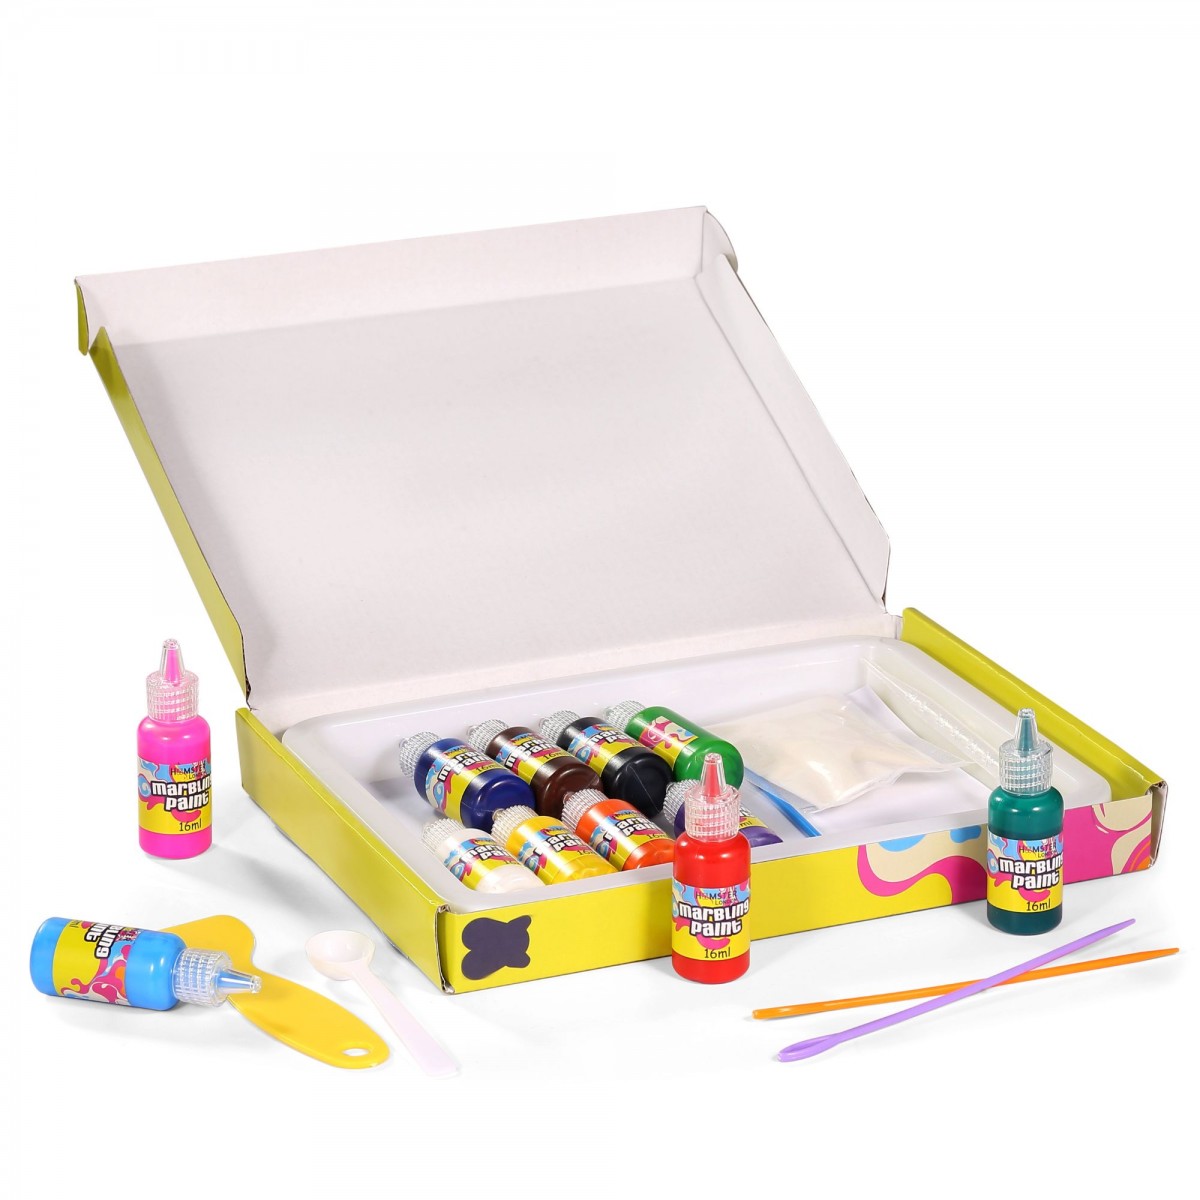 Marbelling Kit Art For Kids By Hamster London, Arts and Crafts for Girls & Boys, Craft Activities For Kids, Multicolour, 3Y+